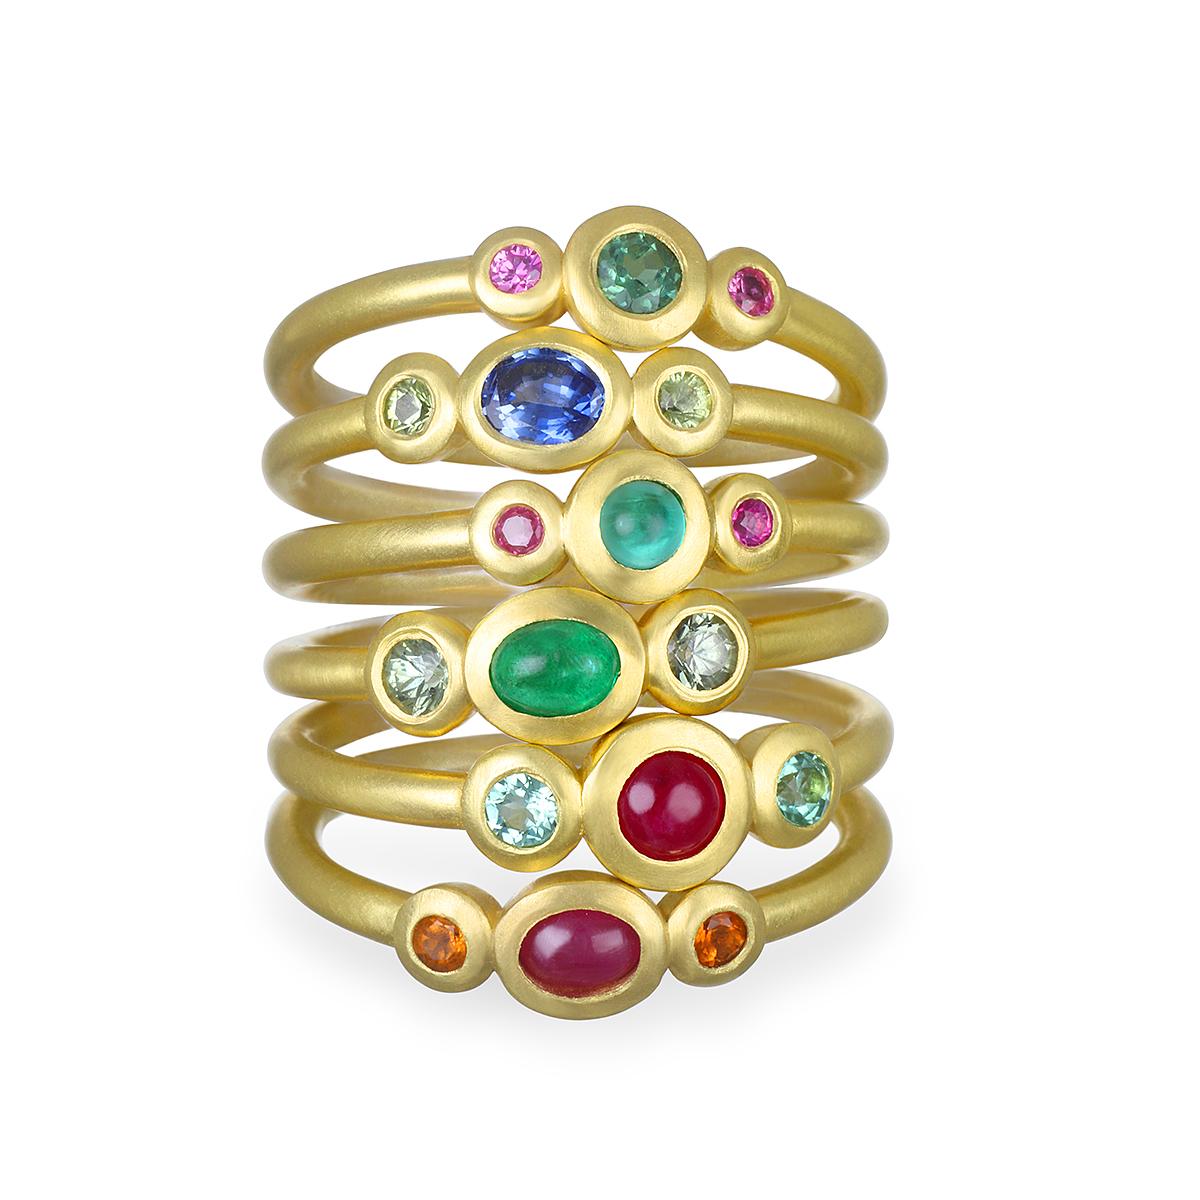 A vibrant oval shaped ruby flanked by sparkling mandarin garnets. This three stone ring is beautifully crafted, bezel set and matte-finished.  Wear alone or stacked with other rings to elevate your individual style!

Handcrafted in 18k green gold,